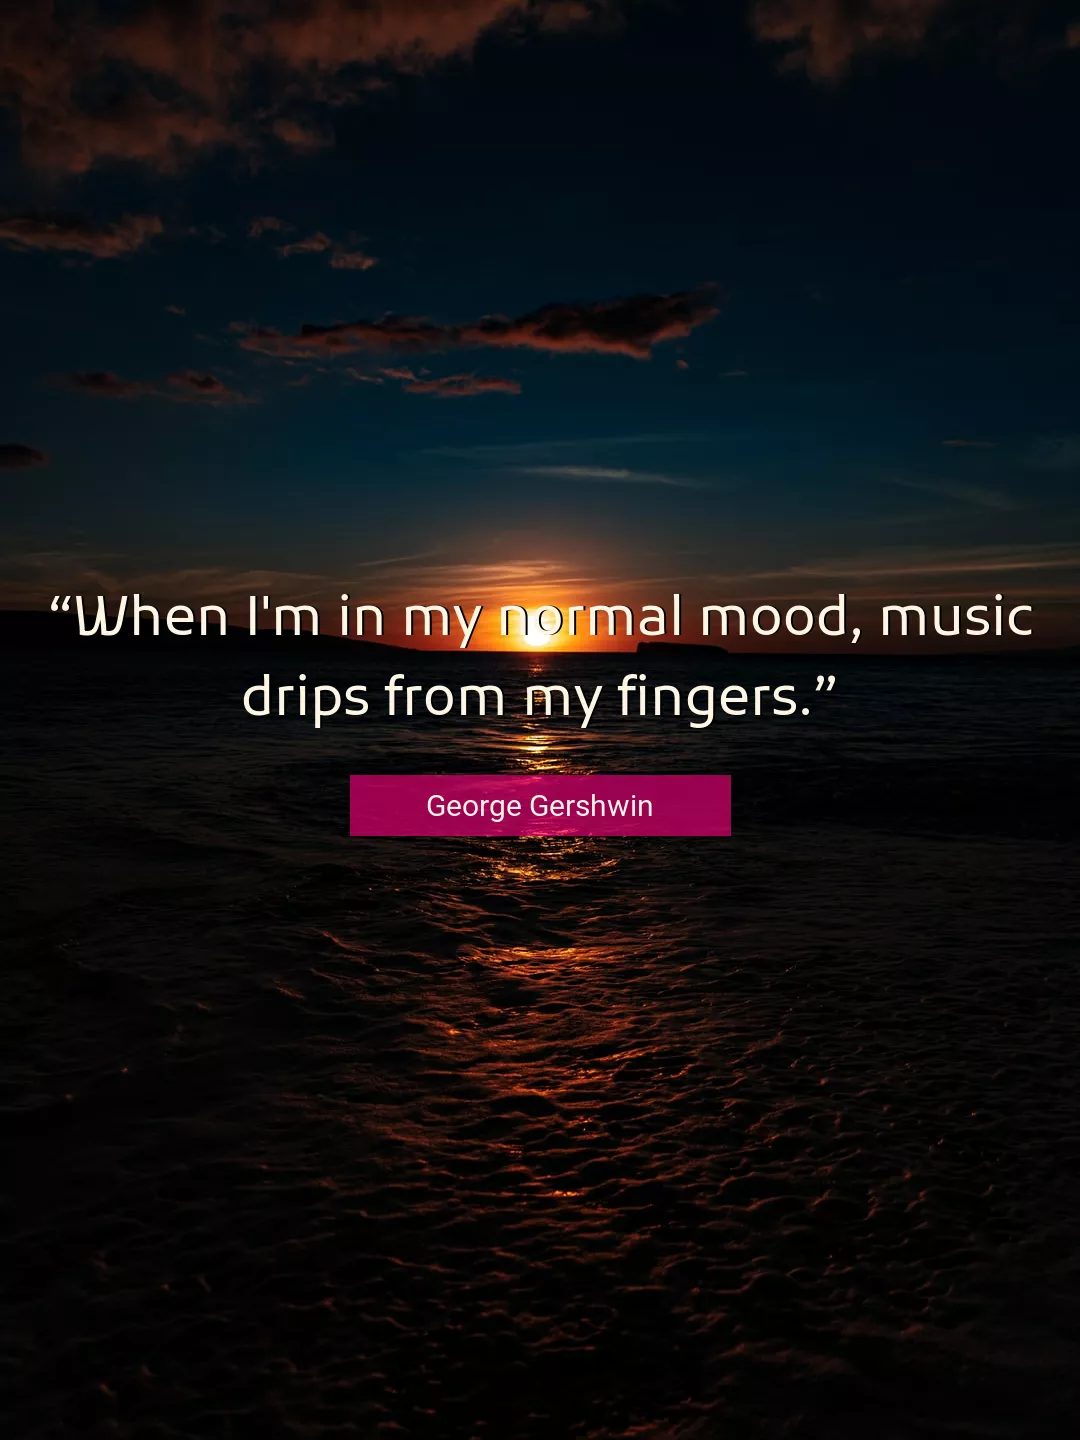 Quote About Music By George Gershwin